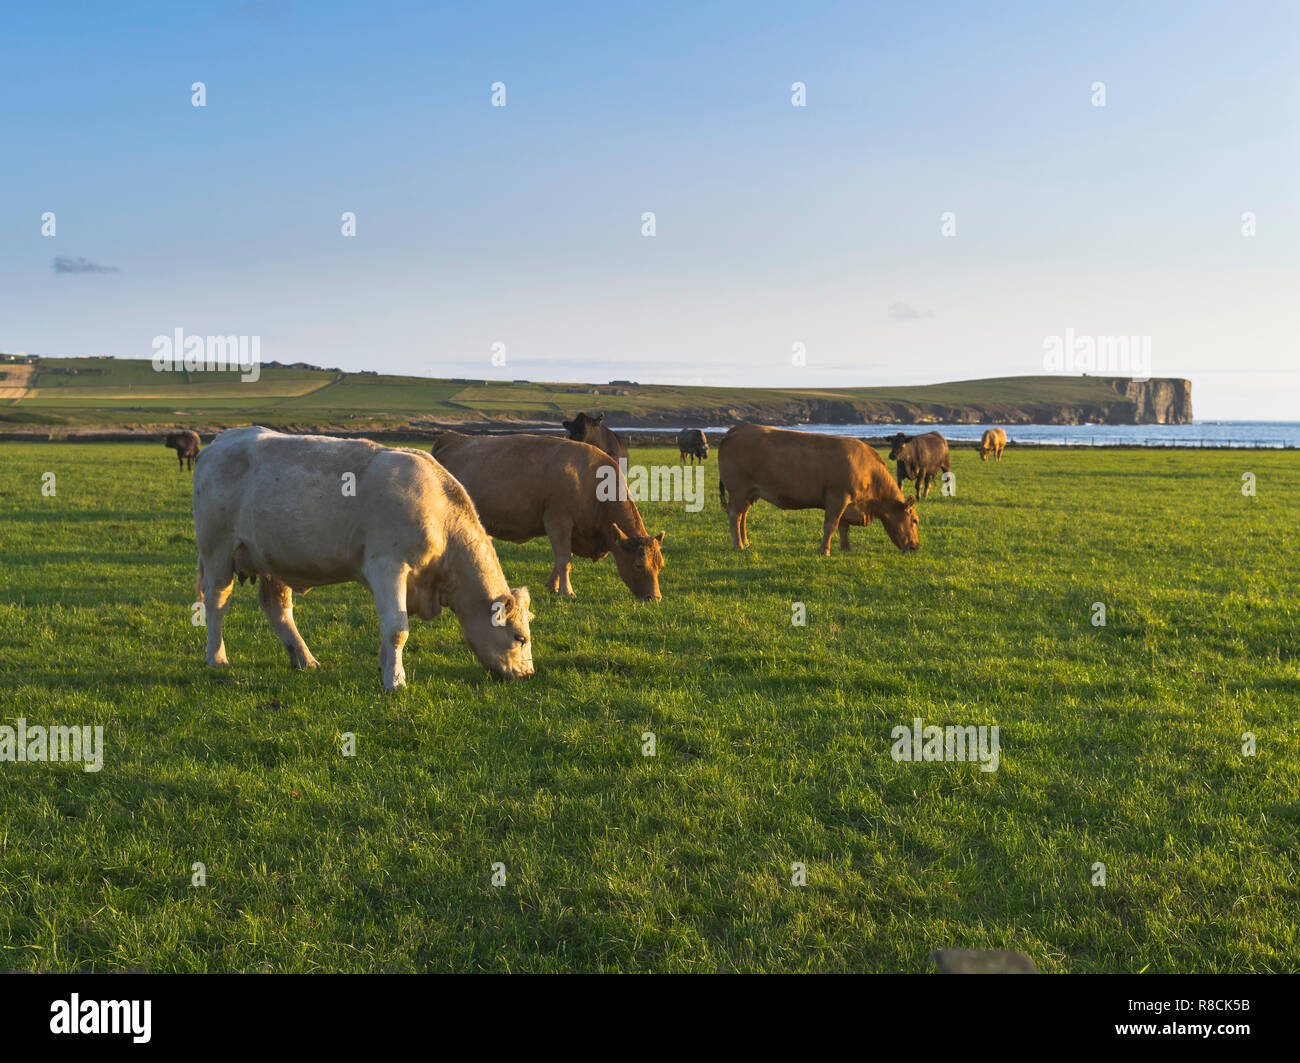 dh Beef cattle BIRSAY ORKNEY Cows grazing in a field Scotland UK eating grass feeding herd landscape Stock Photo